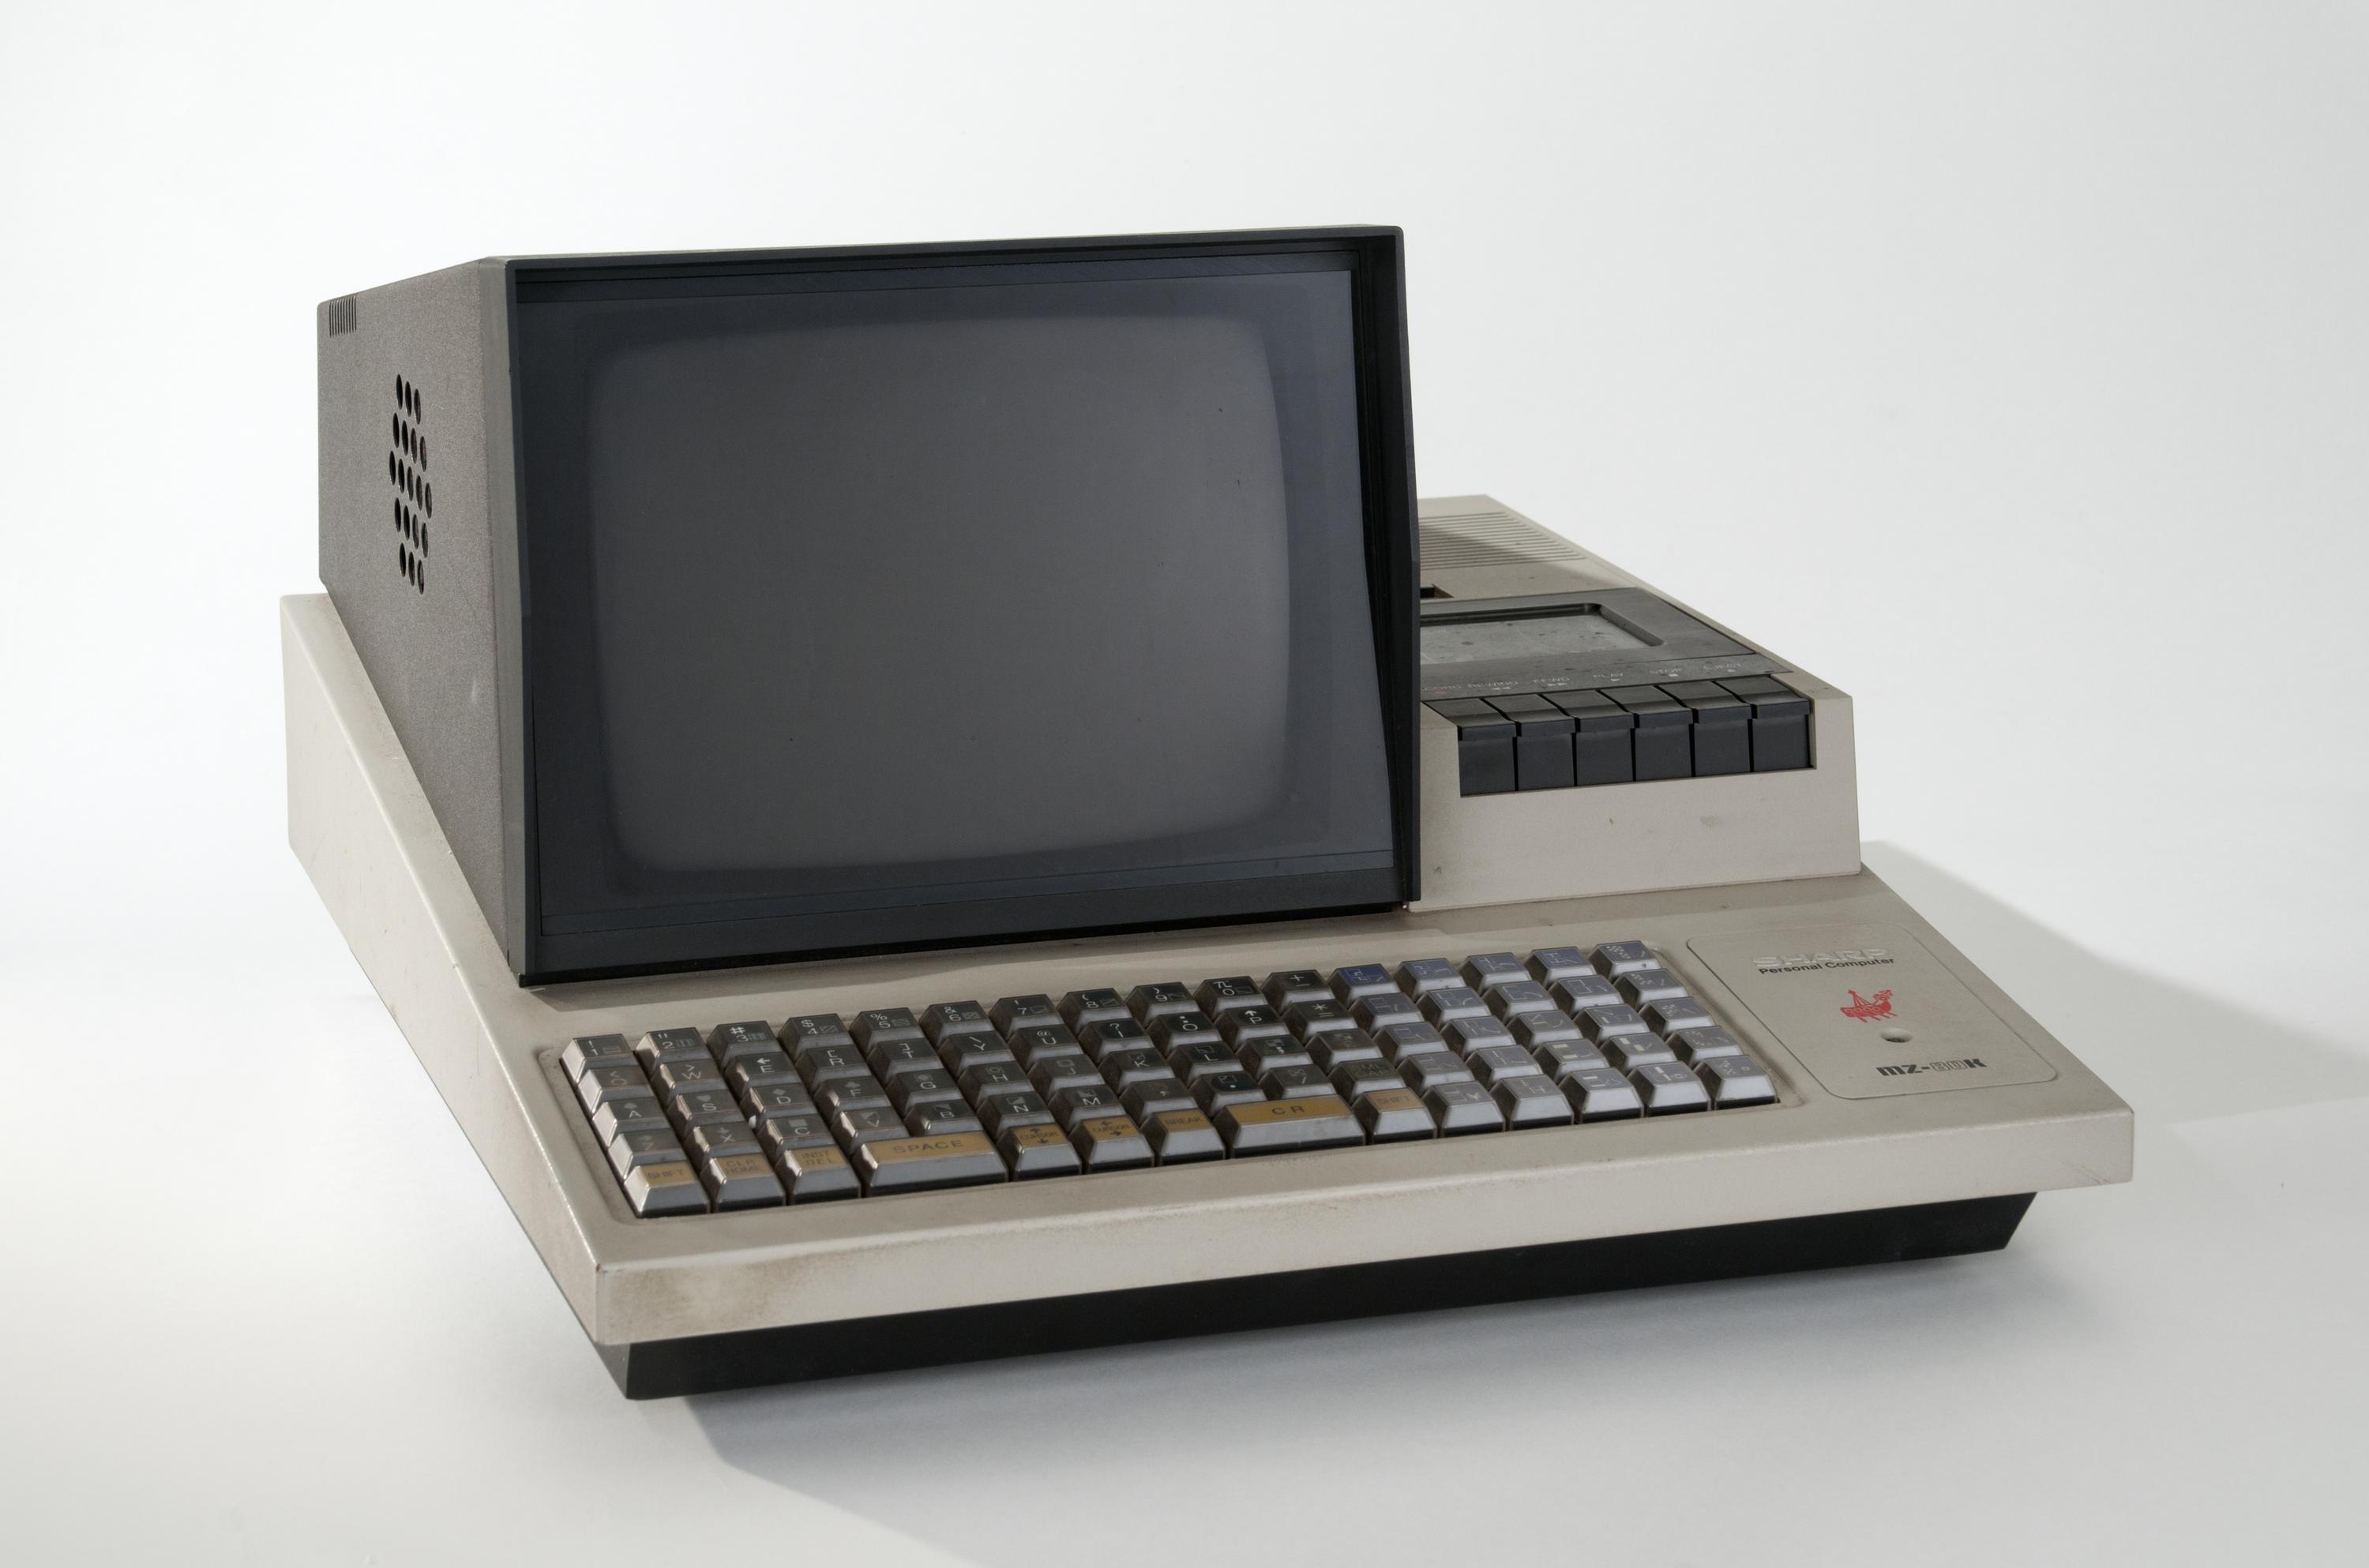 Sharp MZ-80K personal computer complete with floppy disc drive with instructions in original packaging, manufactured by Sharp Corporation in 1979